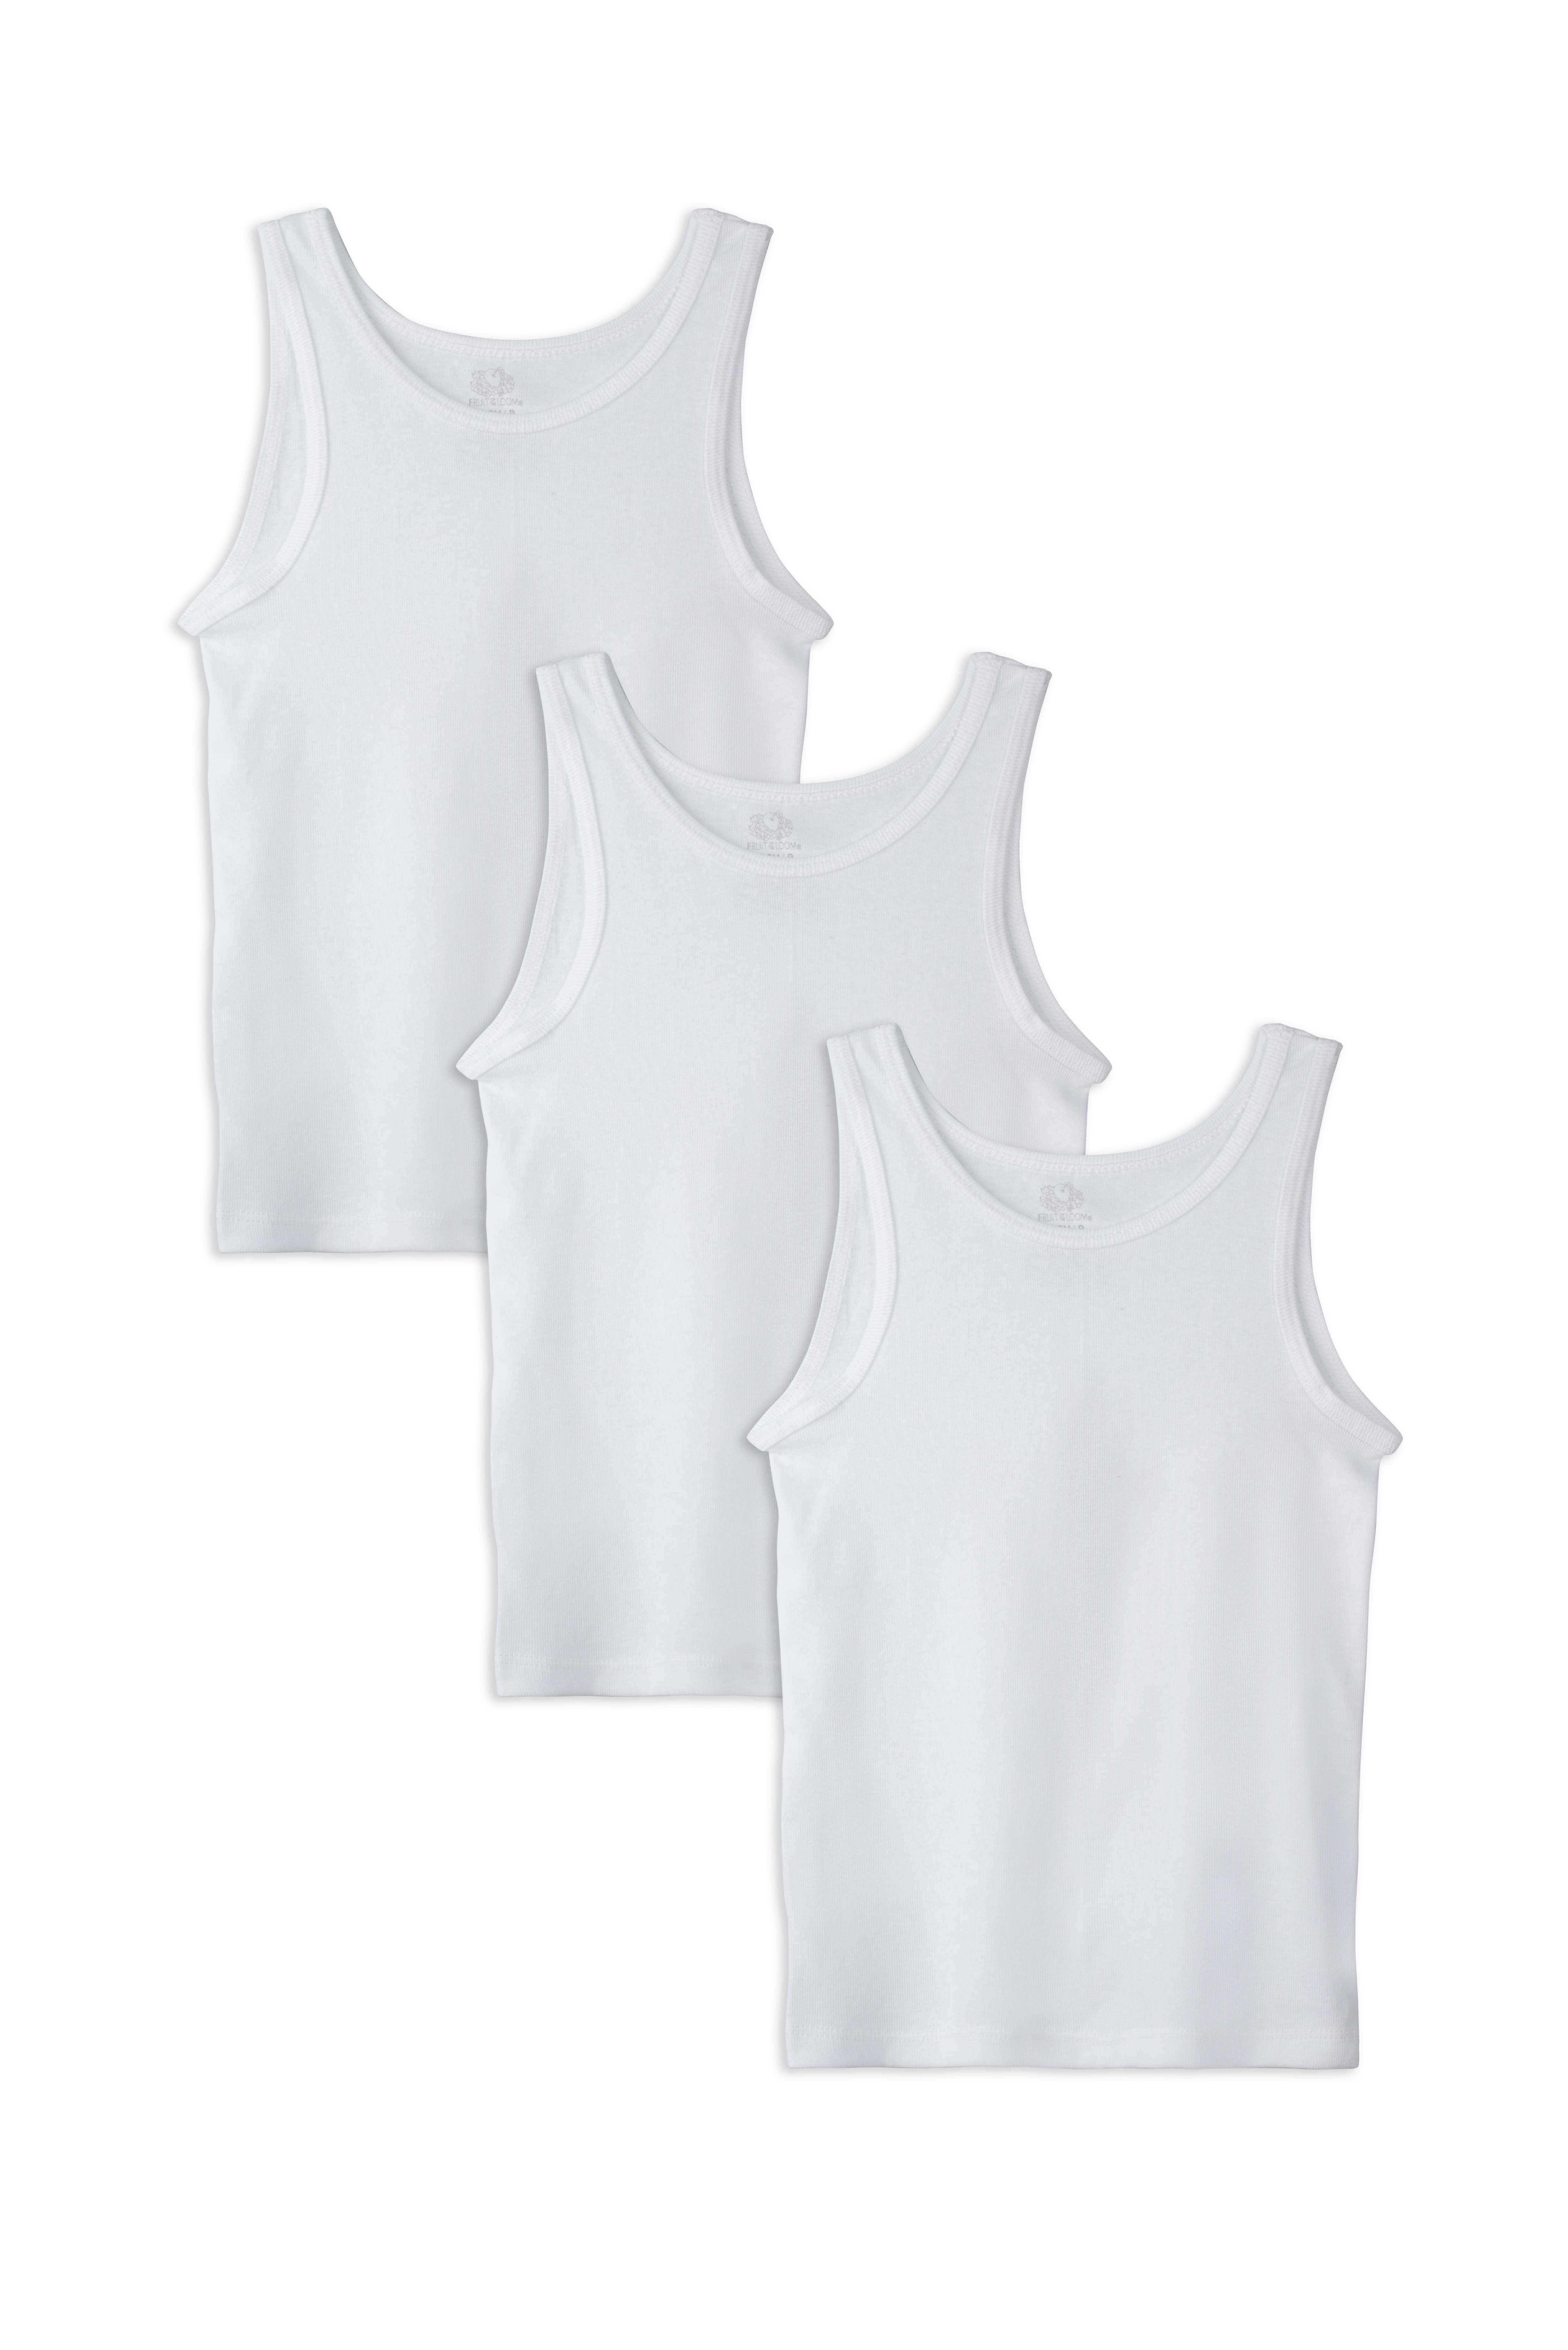 Camis & Tanks Fruit of the Loom Girl's Undershirts Camisole 